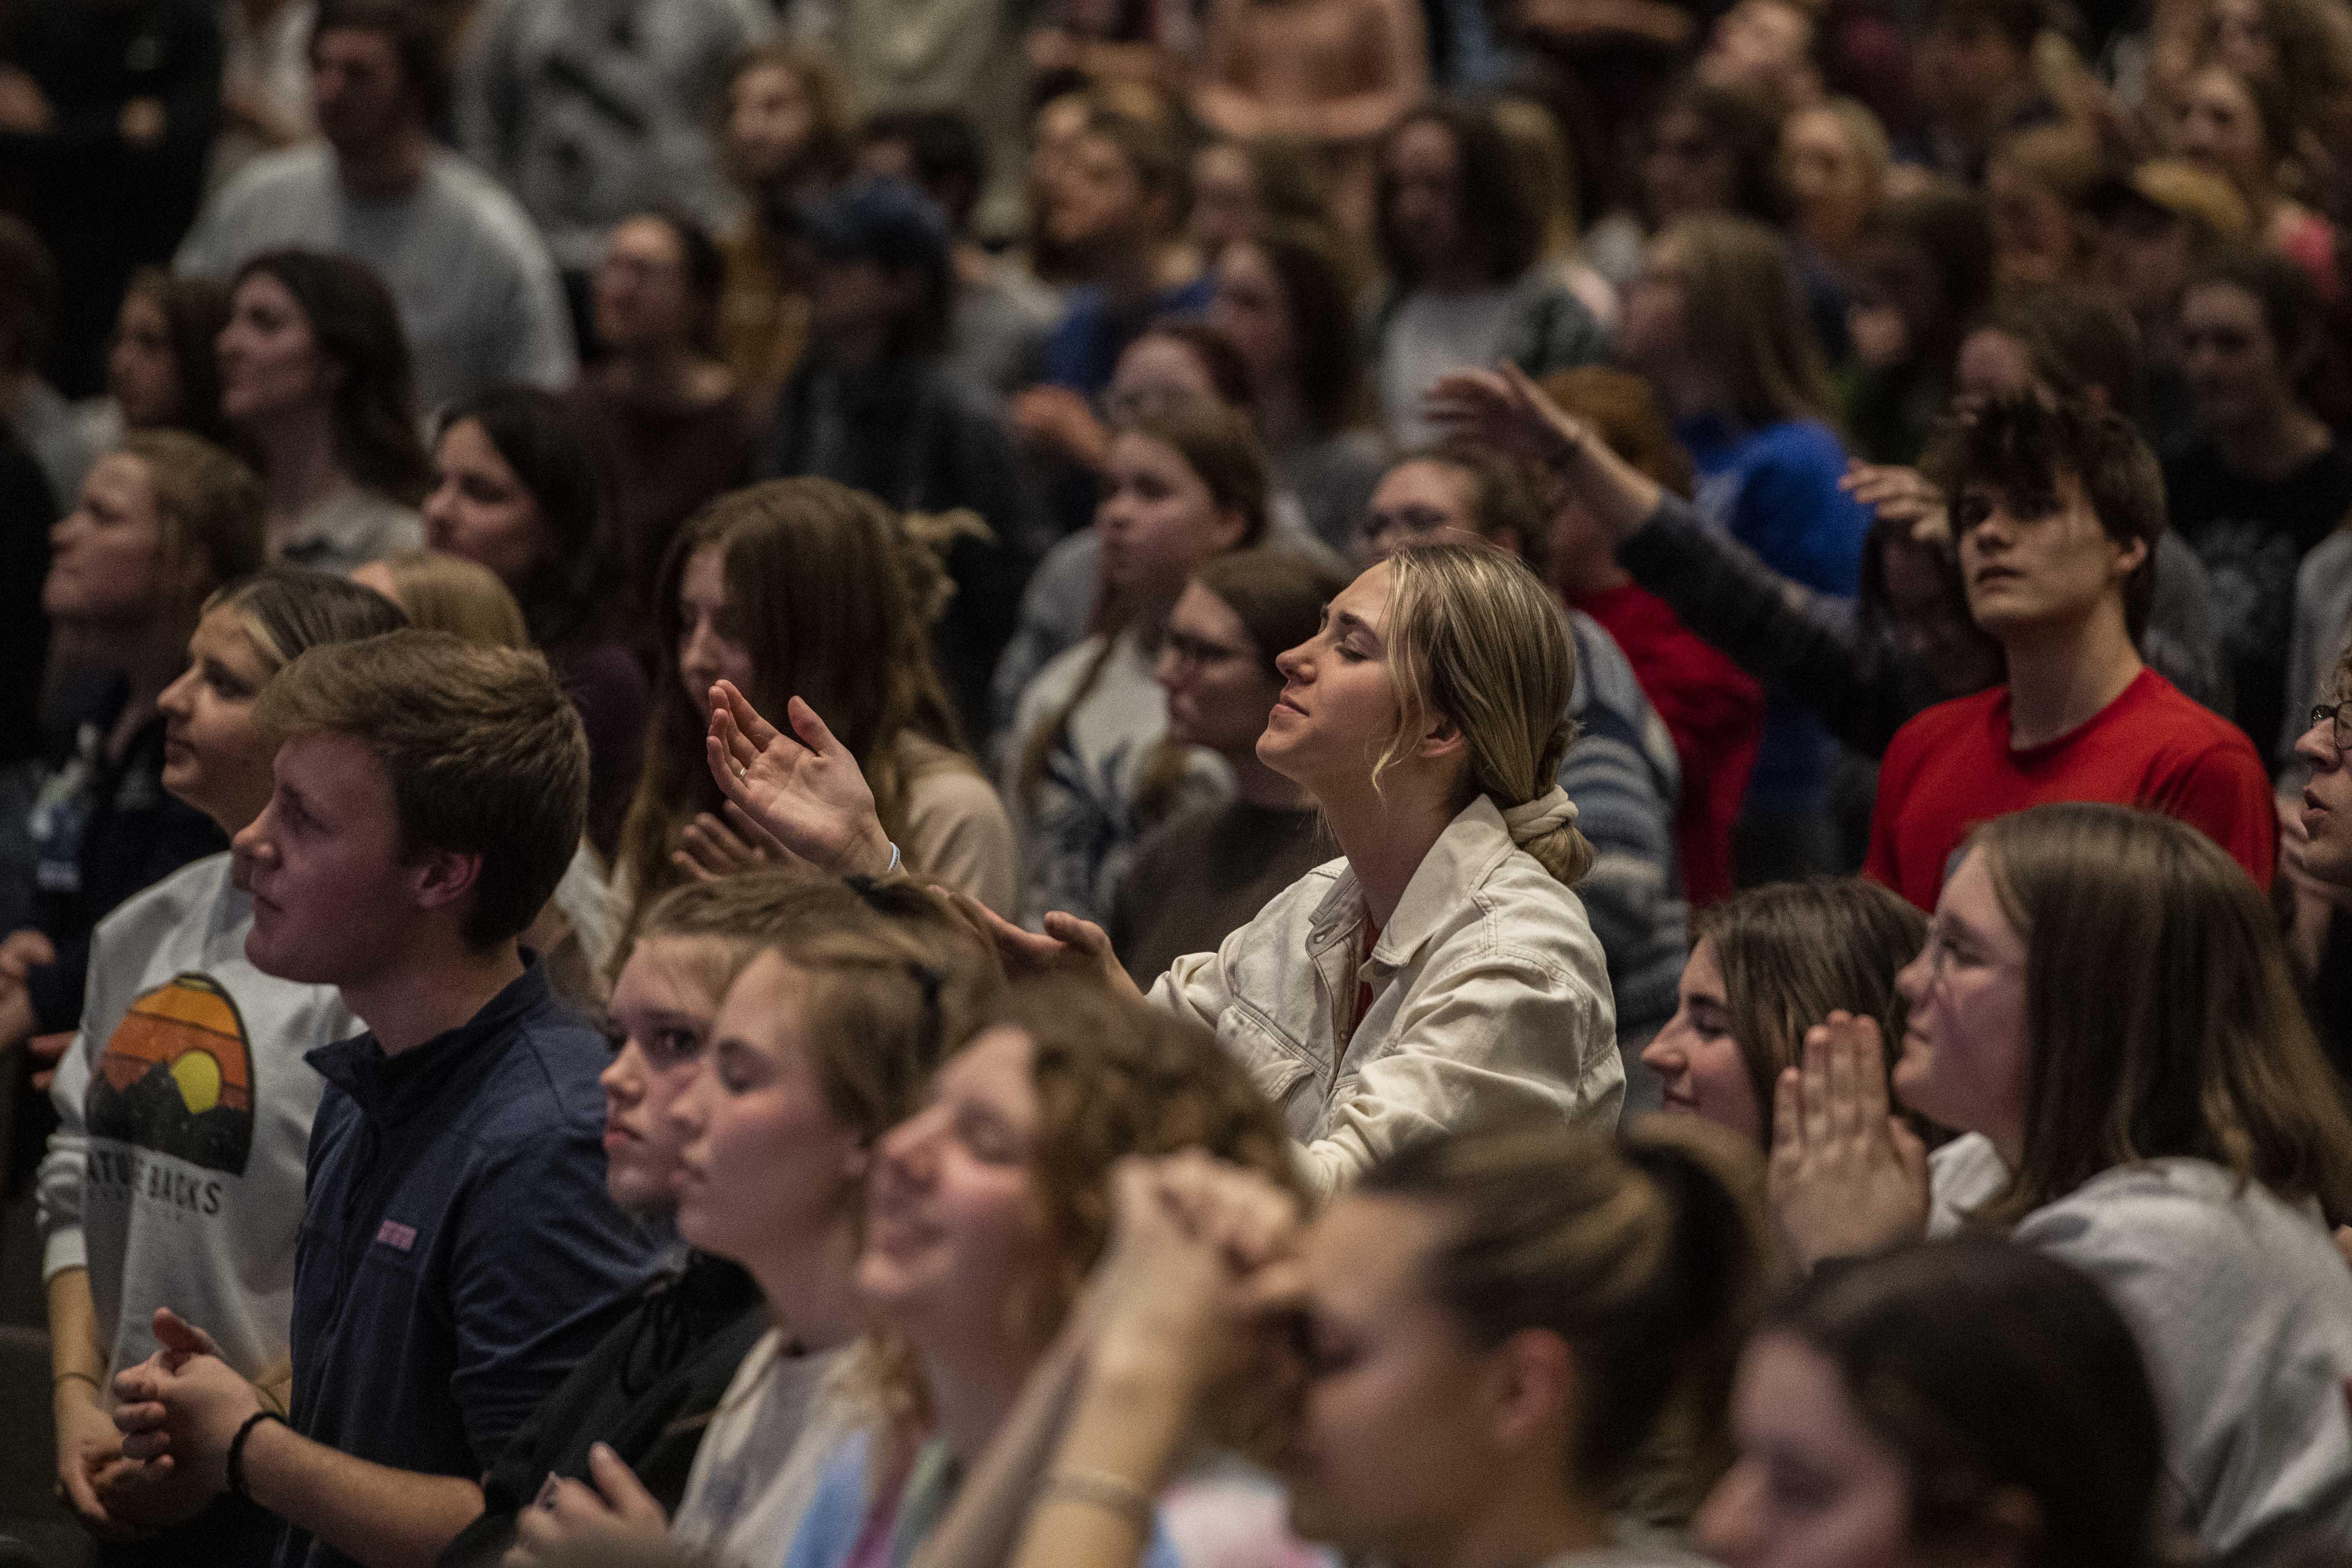 "God convicted me of my “little faith” when I walked in to see a thousand, maybe more, students." 